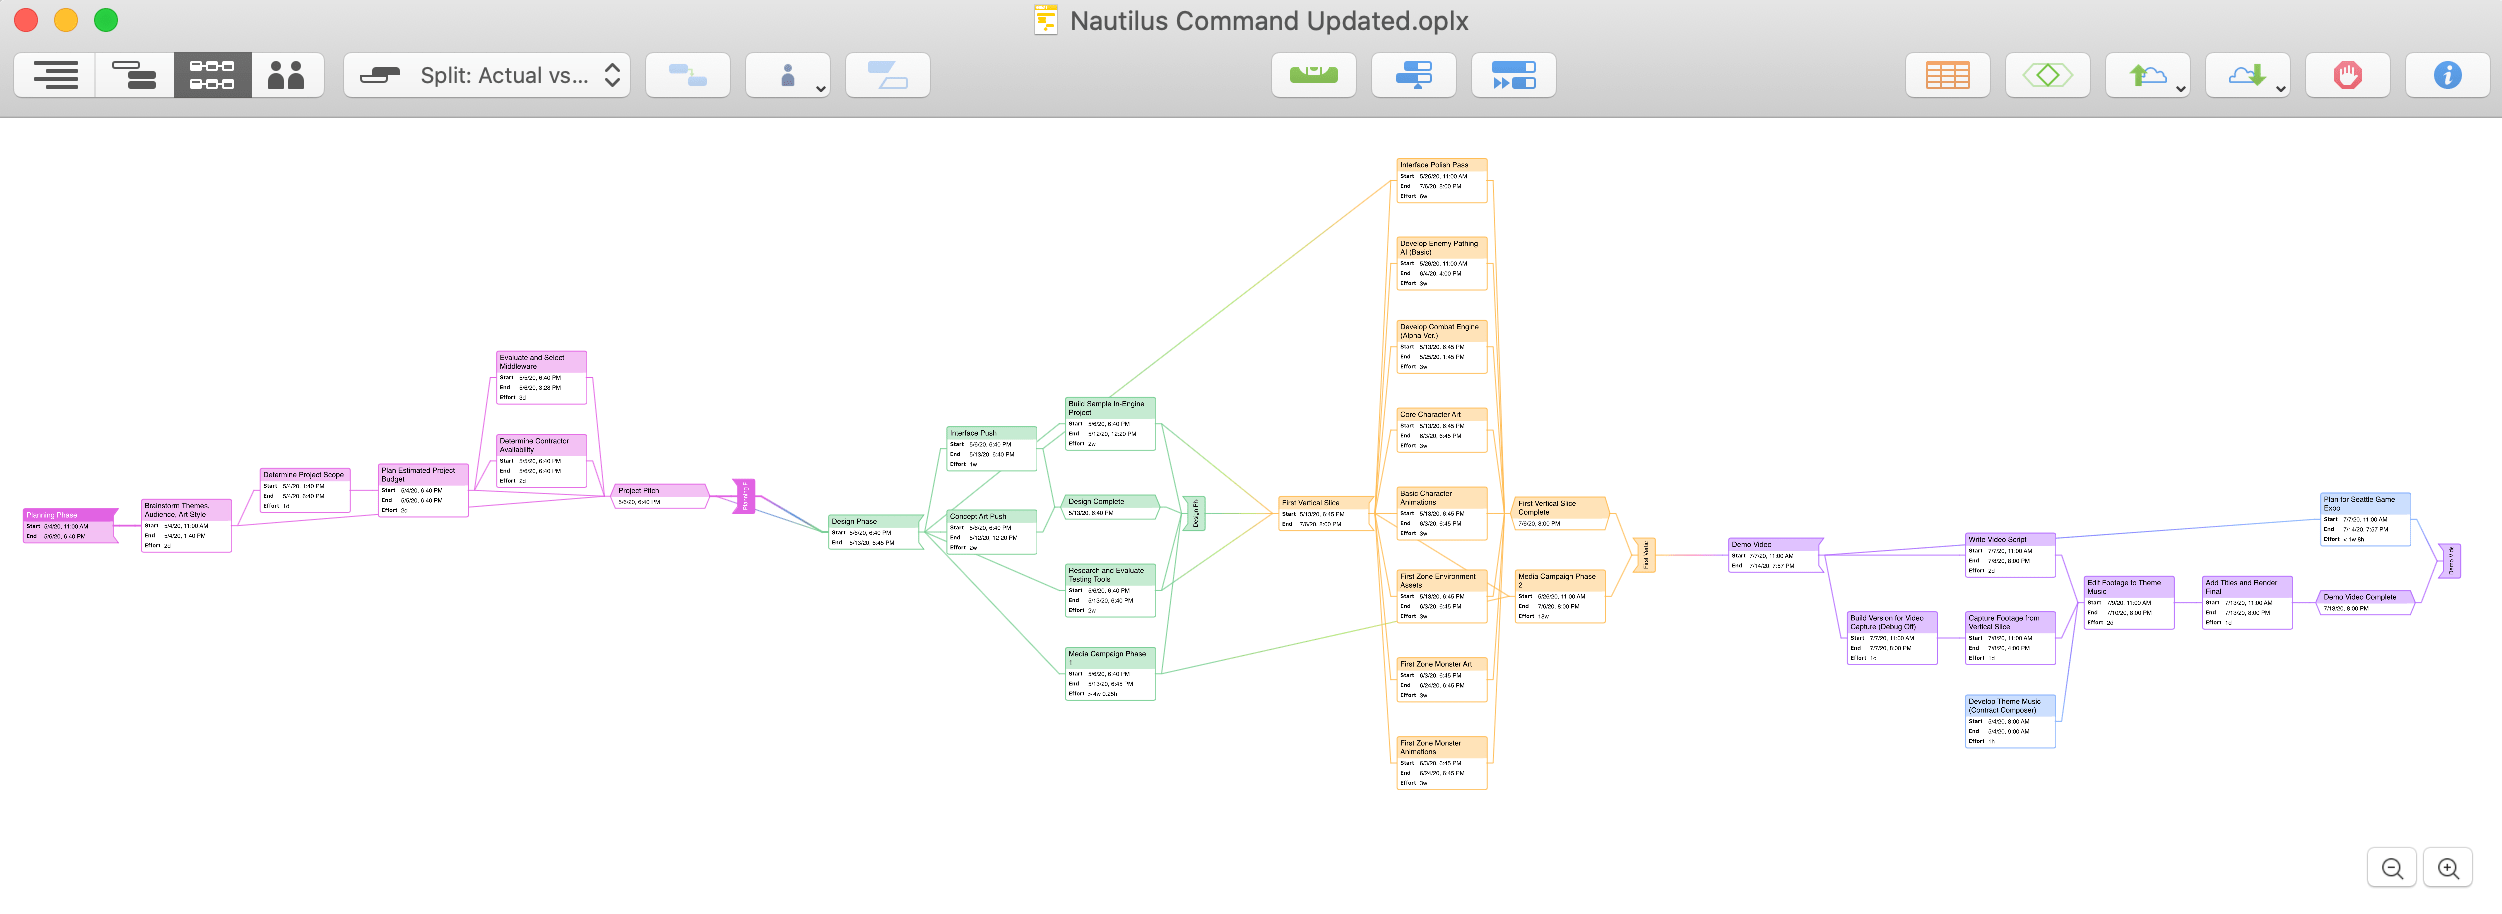 A project in Network view.